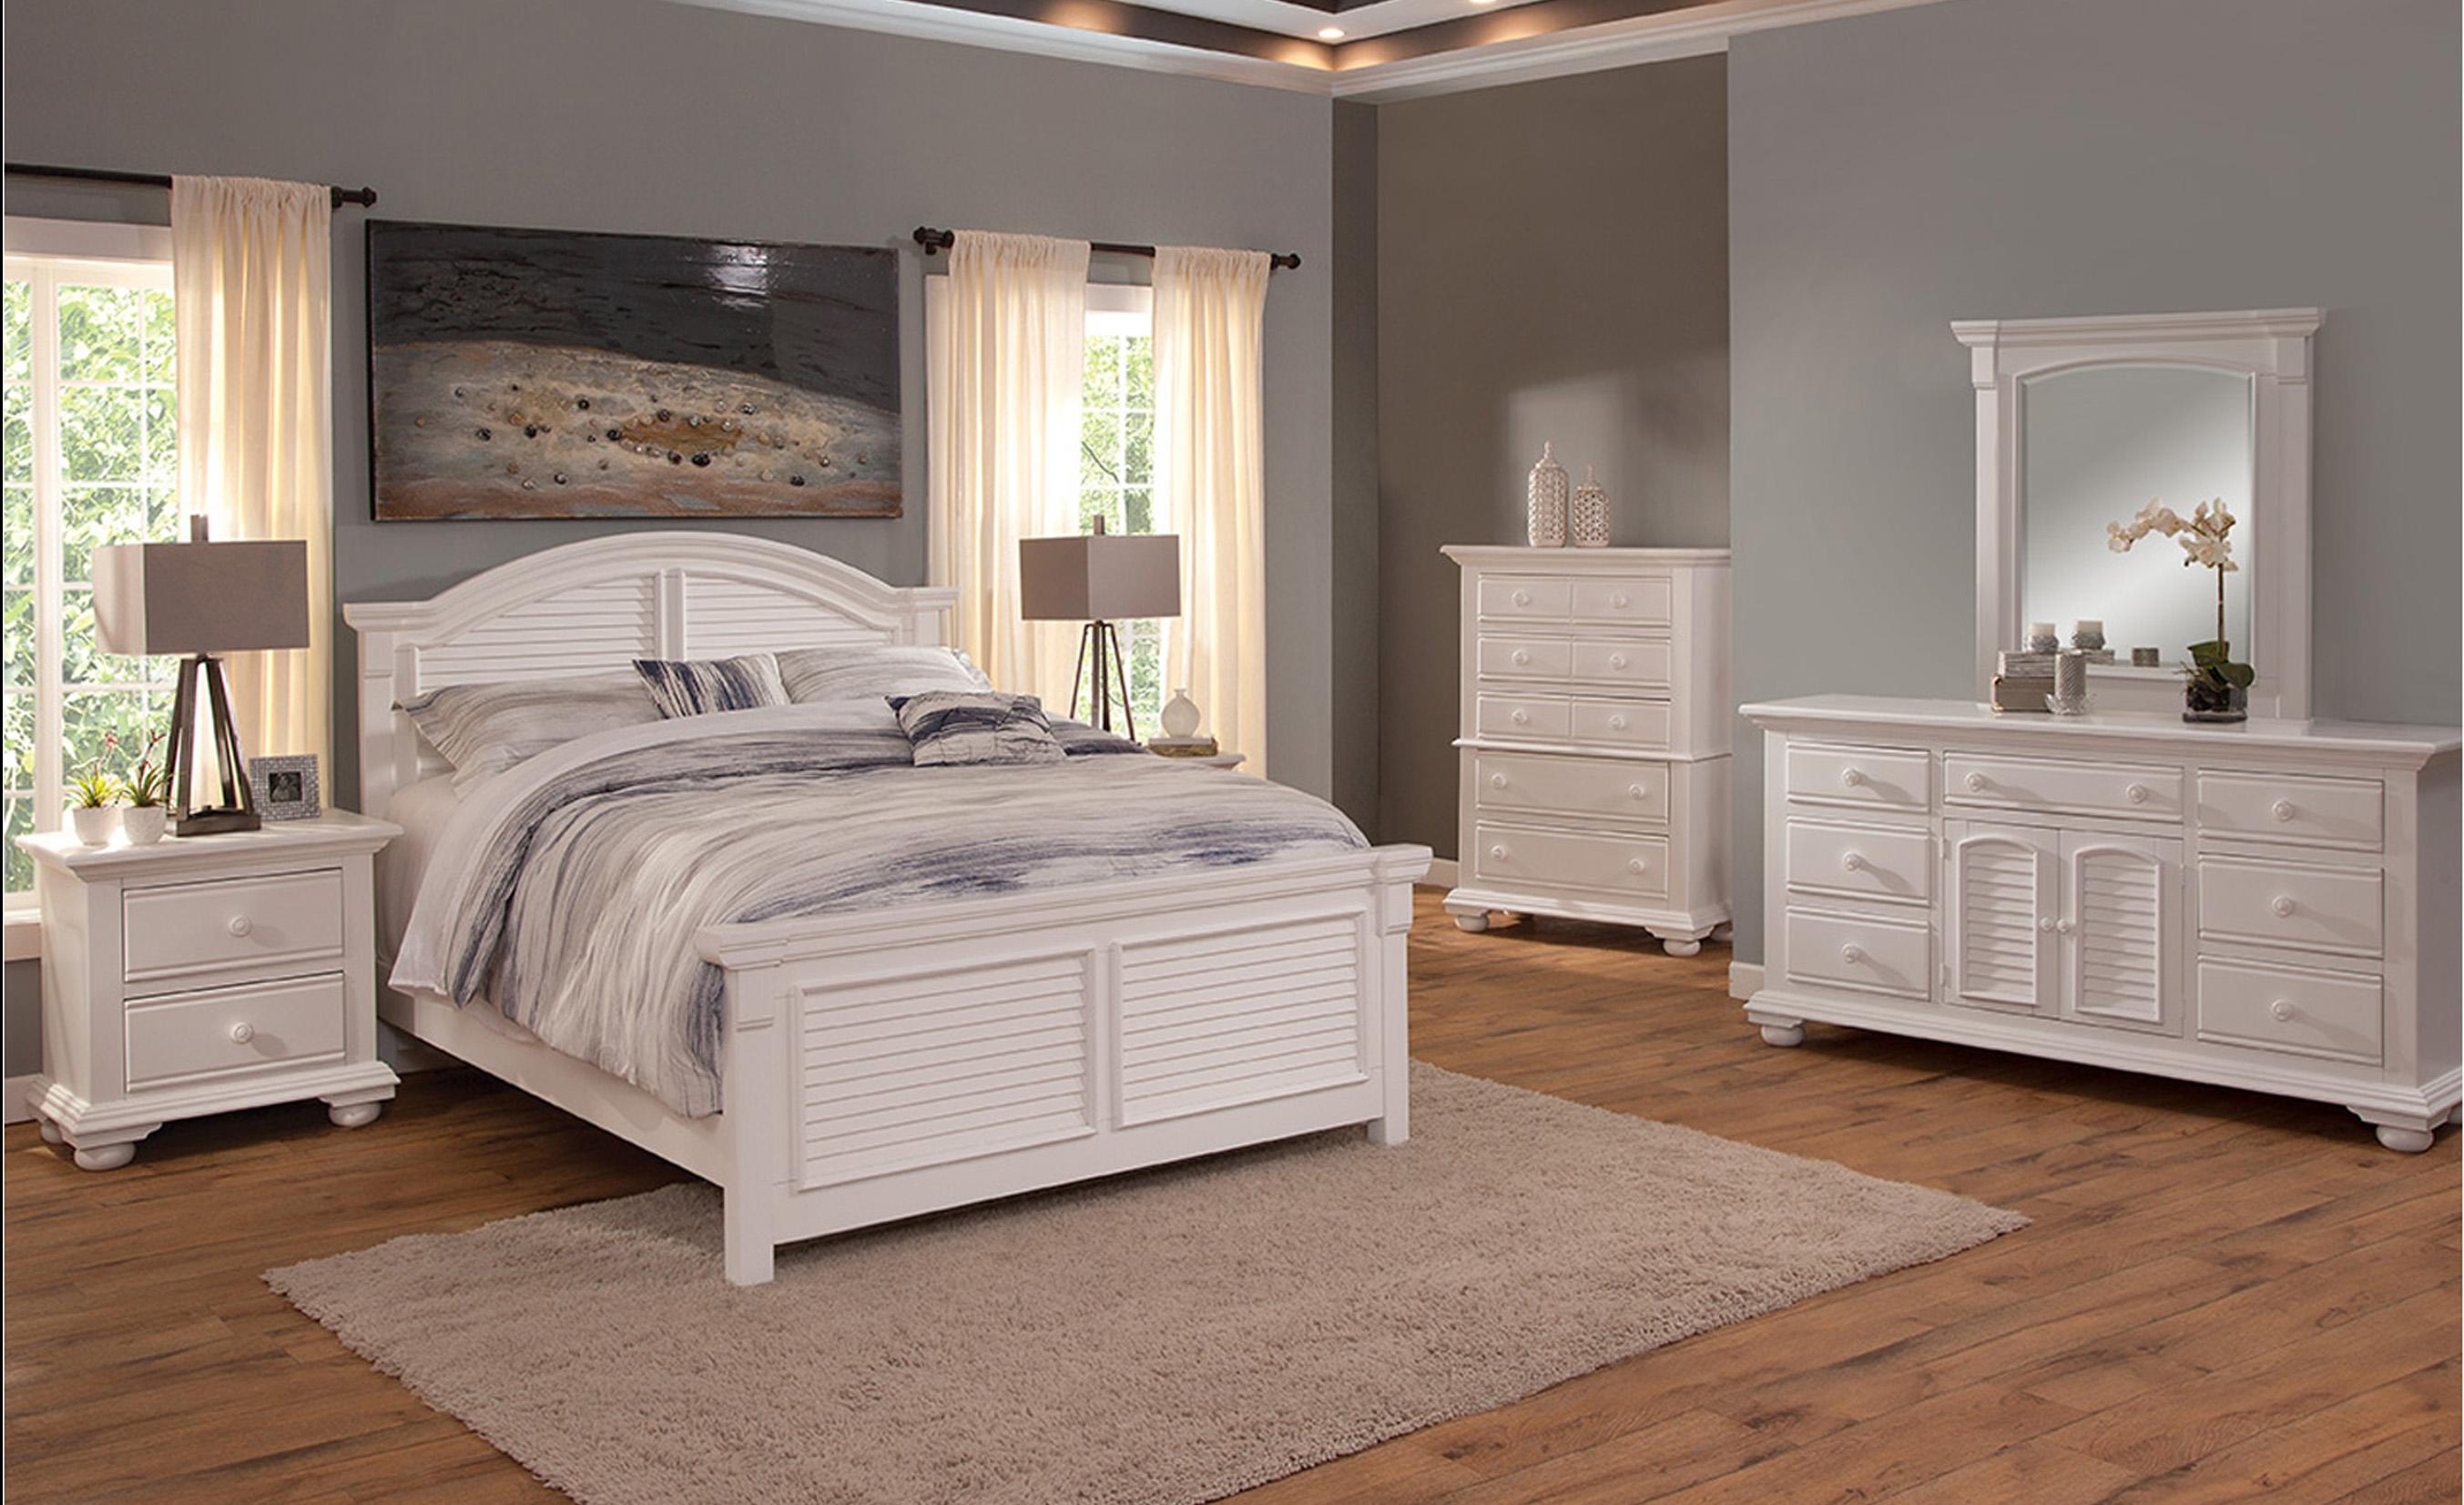 

        
American Woodcrafters COTTAGE 6510-50PAN Panel Bedroom Set White  891366039137
